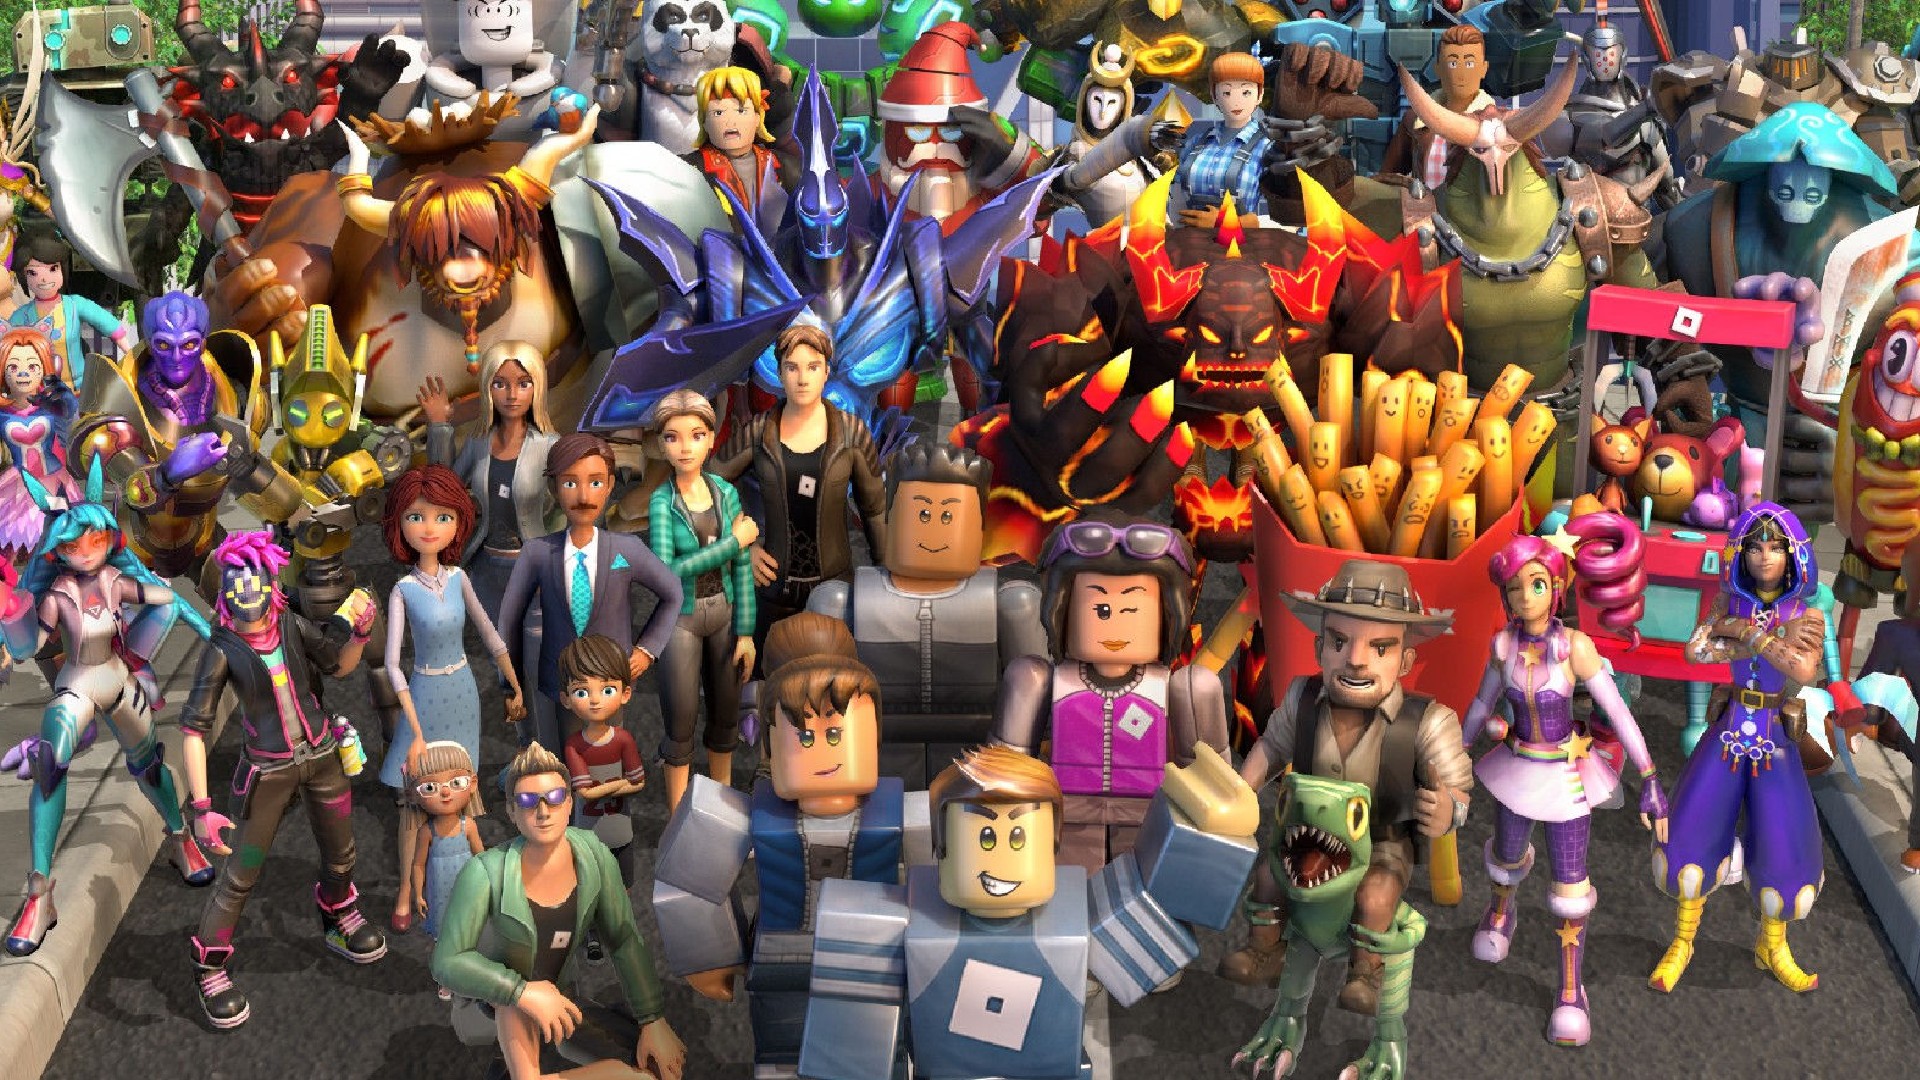 Minimum System Requirements for Roblox